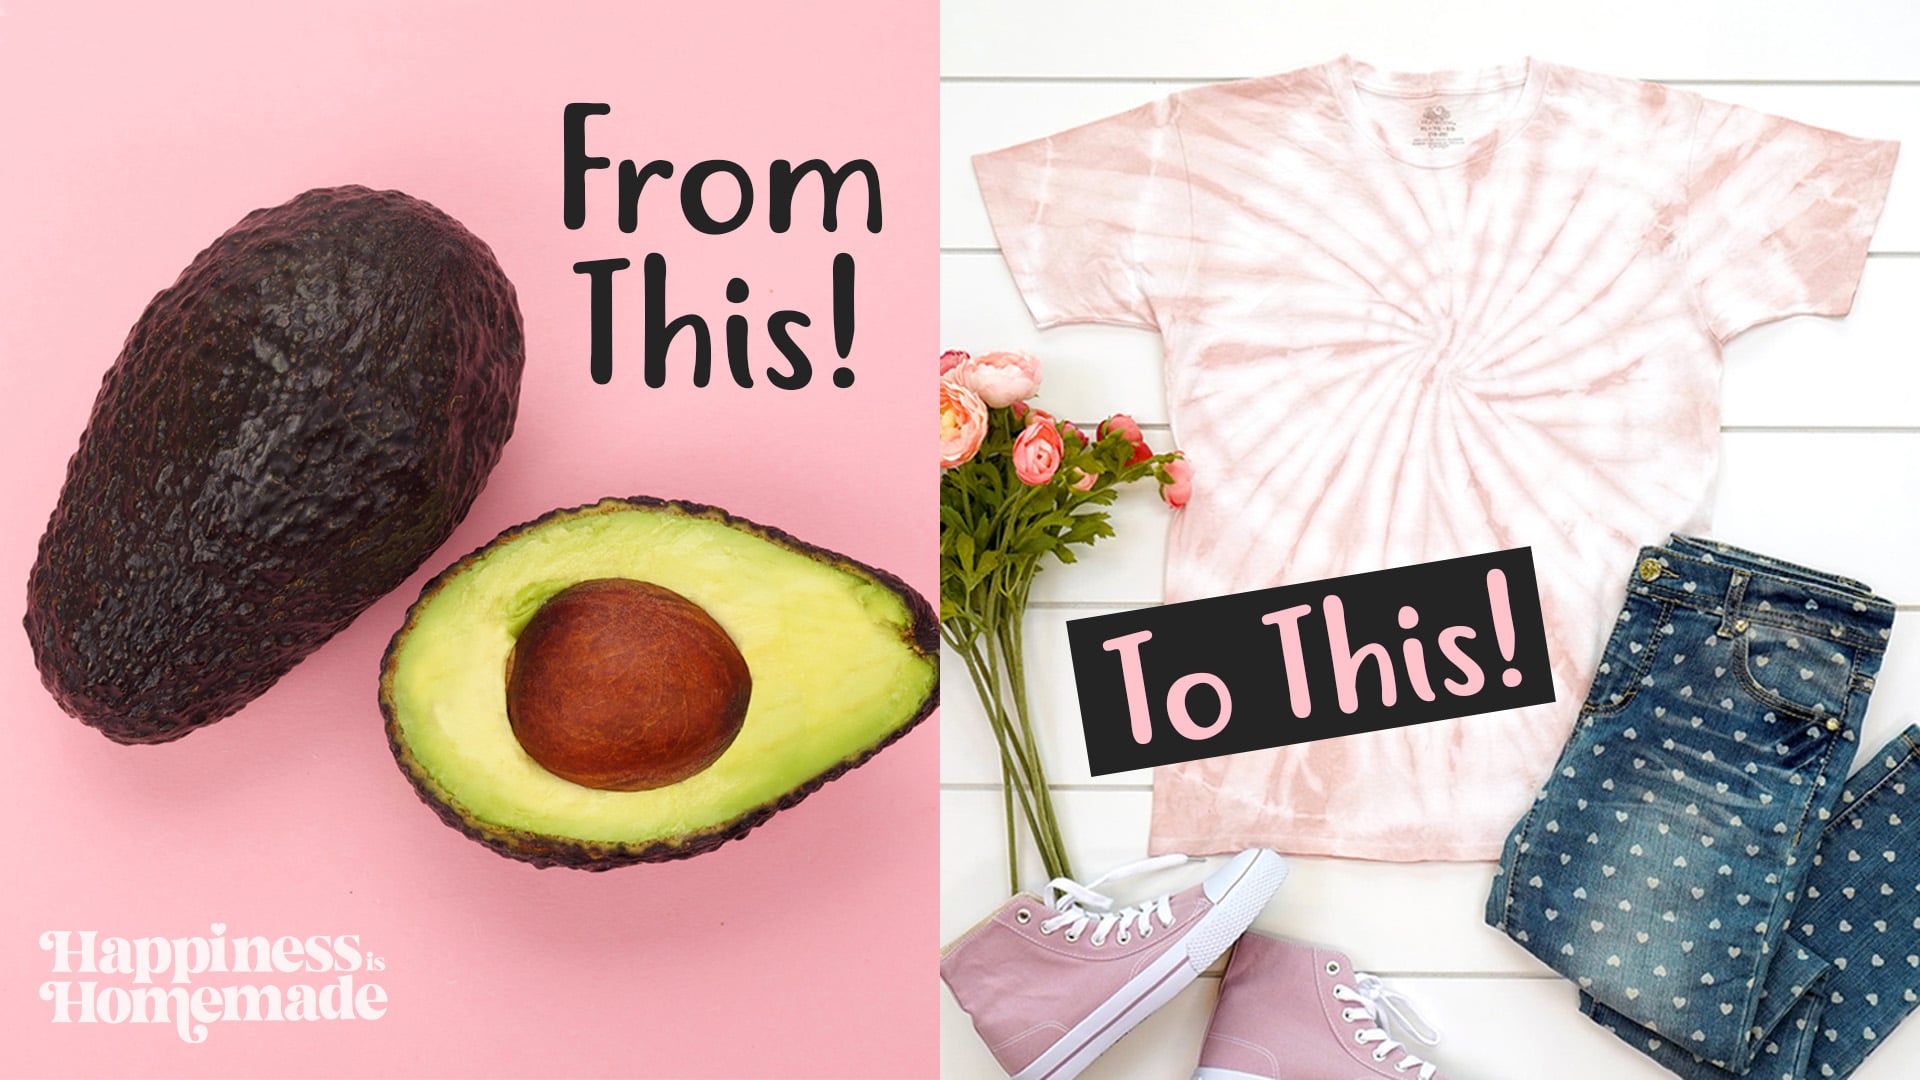 Graphic "from this" "to this" showing an avocado and a shirt that has been tie-dyed with avocado pit dye